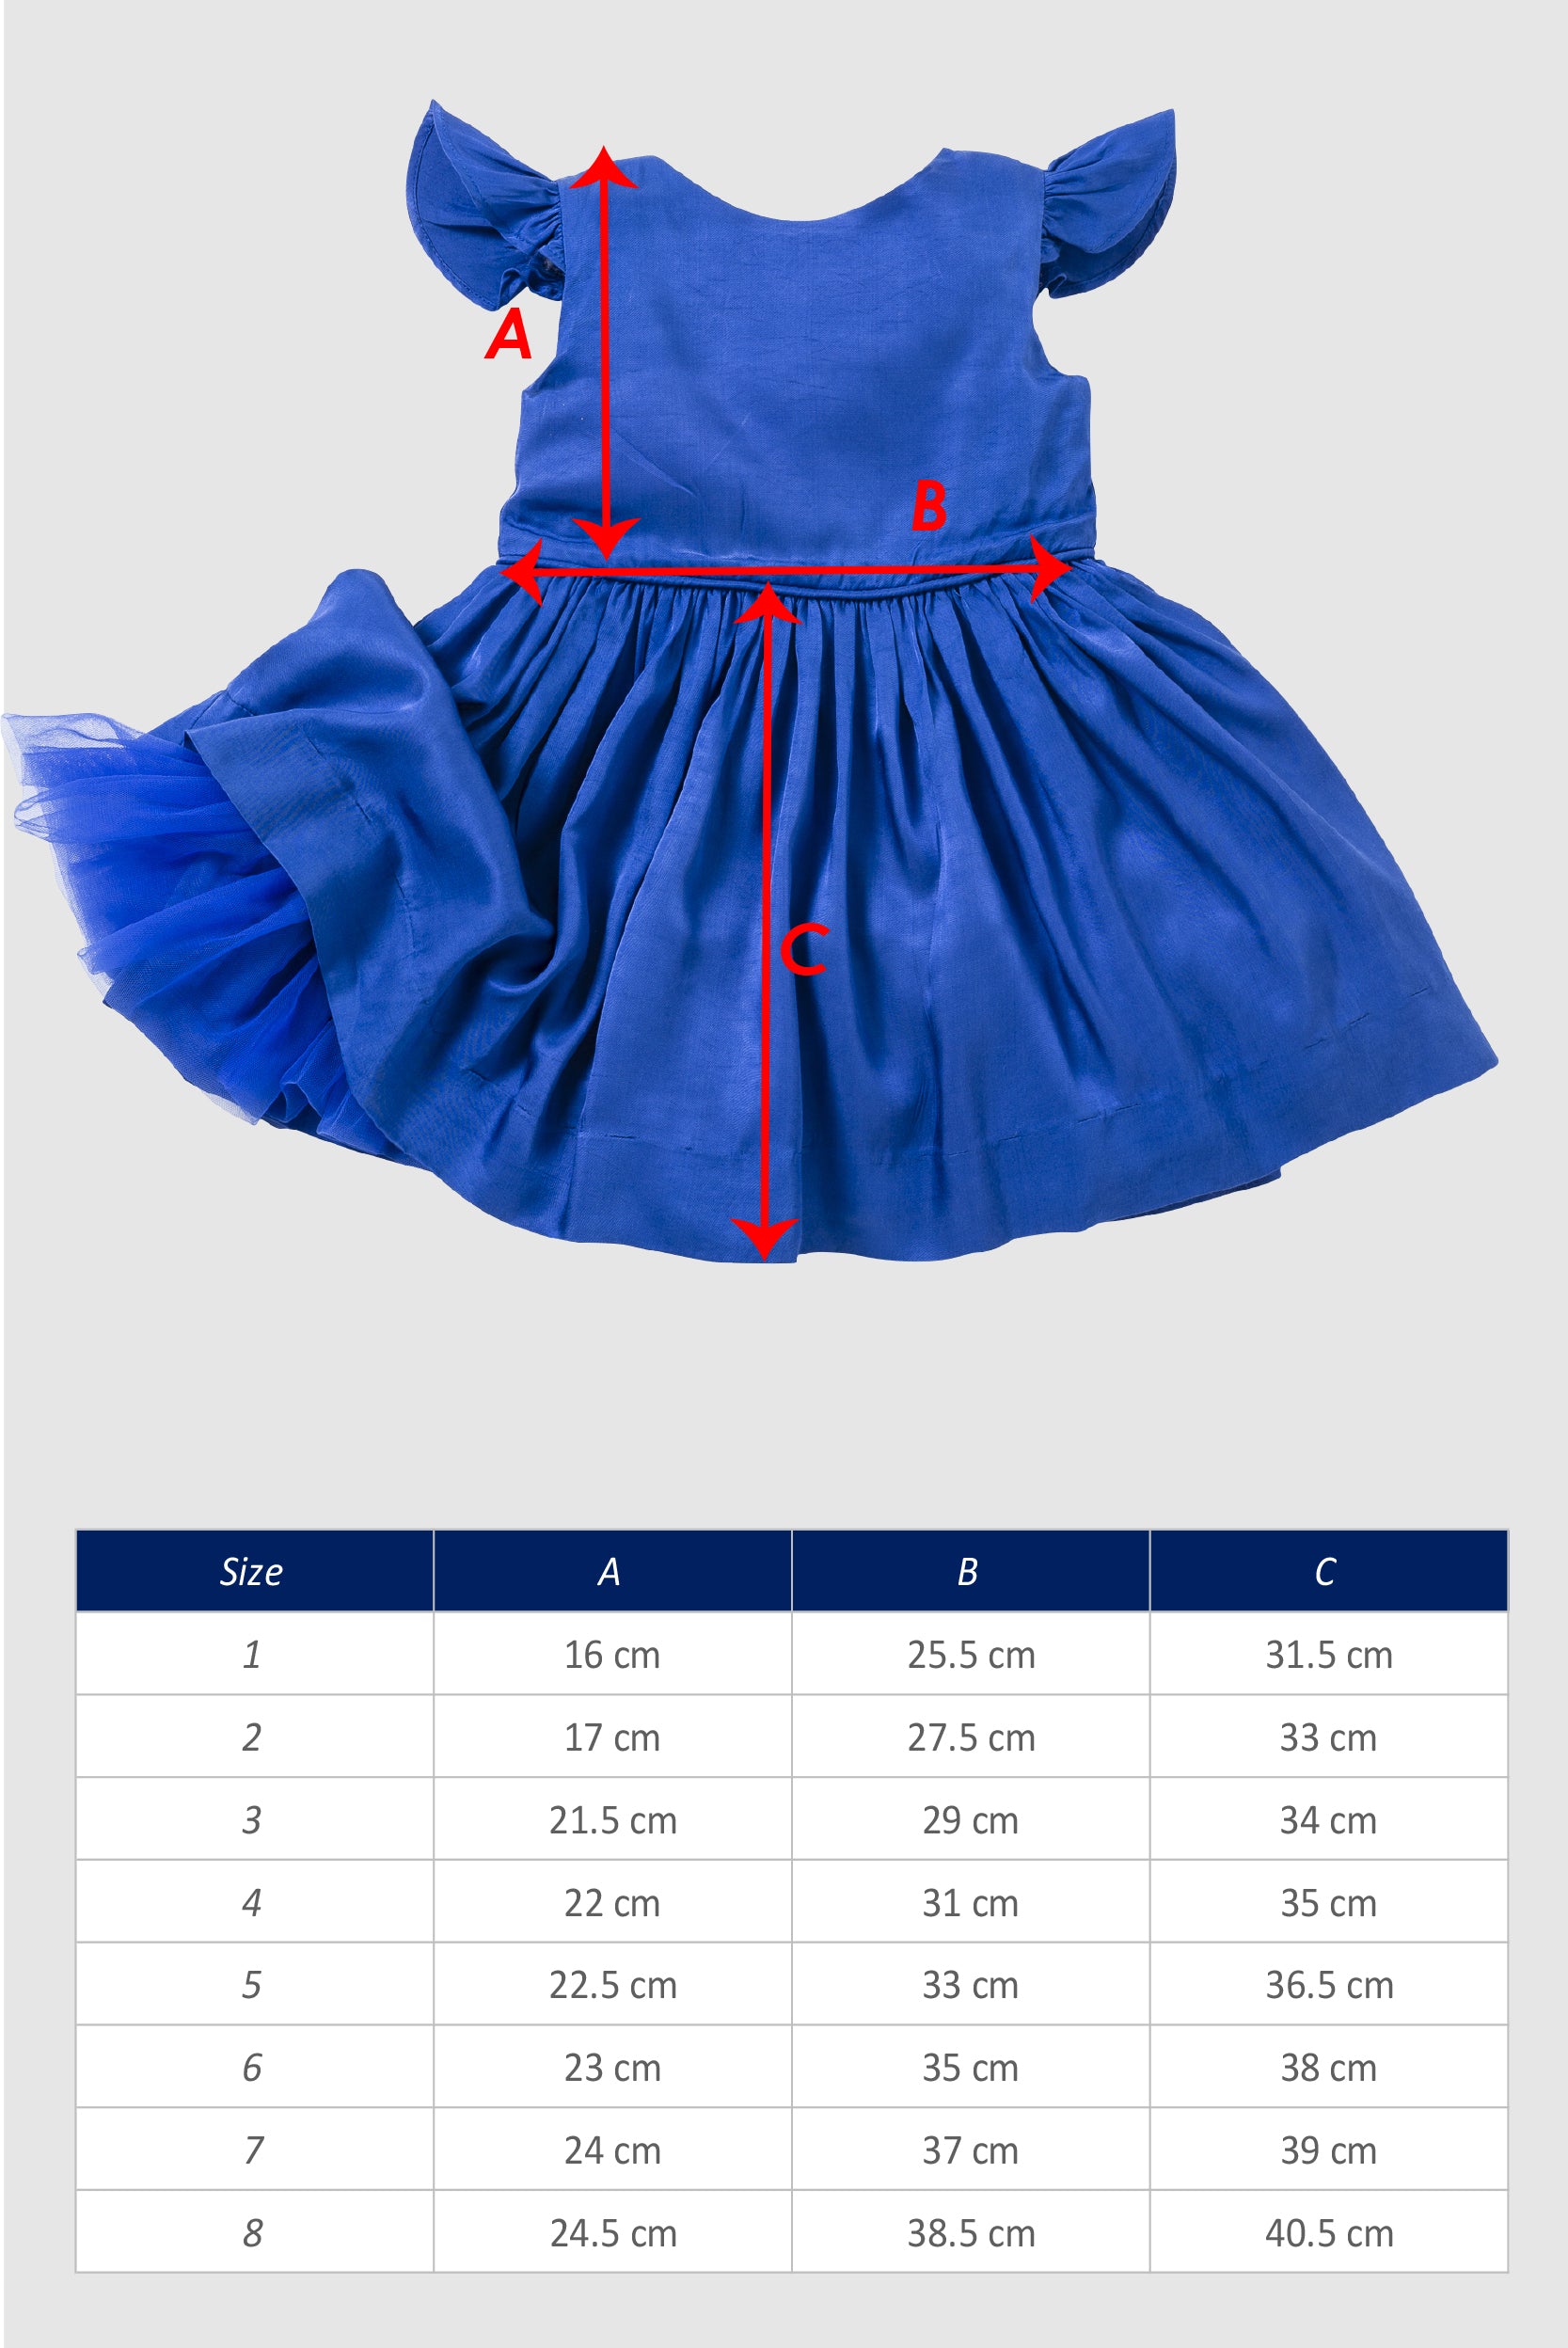 Girls-Dress-The-House-of-Fox-Aria-Blue-Size-Guide